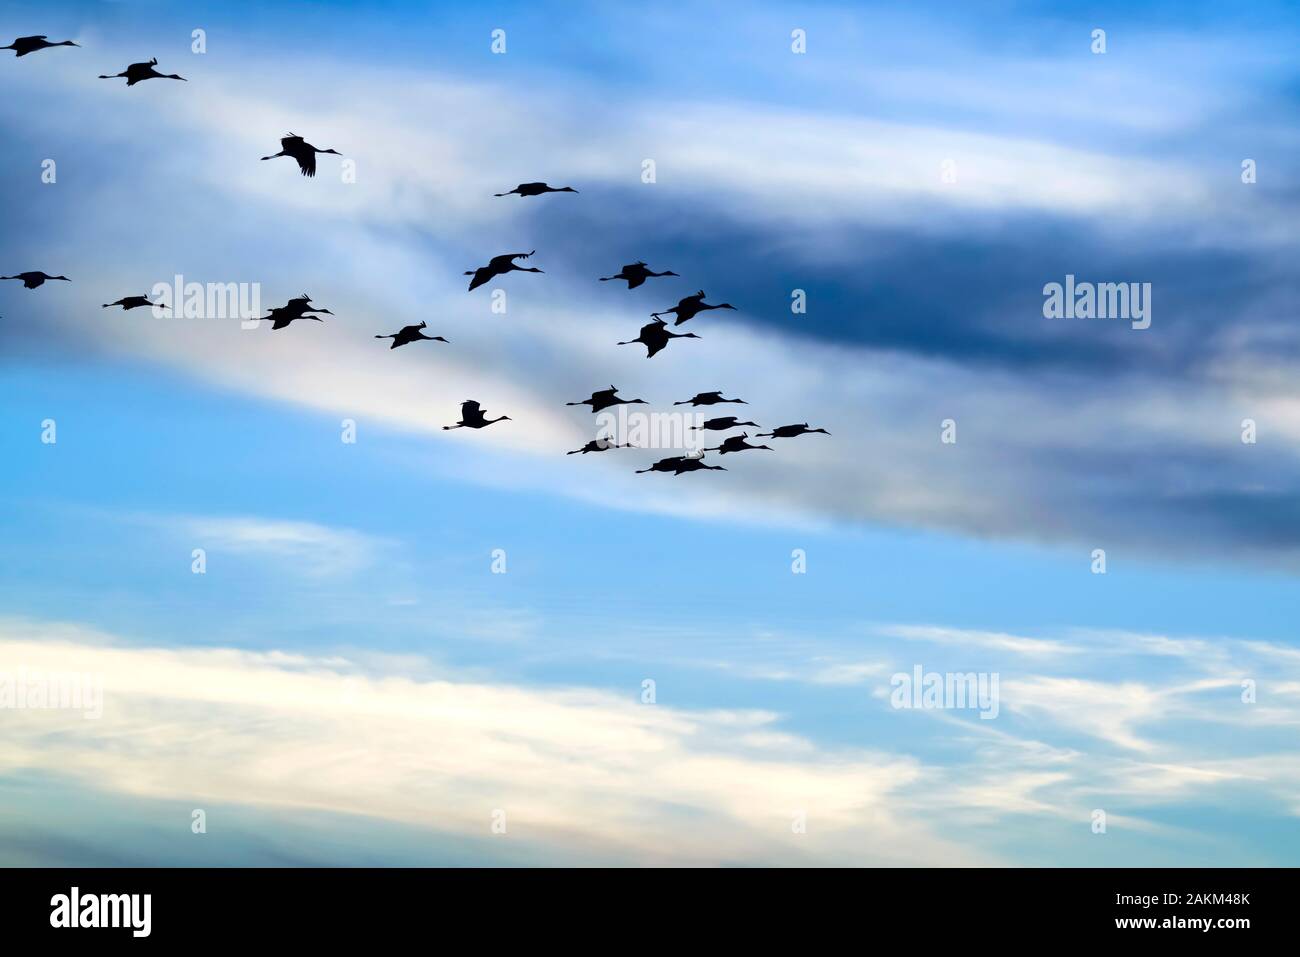 A flock of sihouetted sandhill cranes flying in formation. Stock Photo